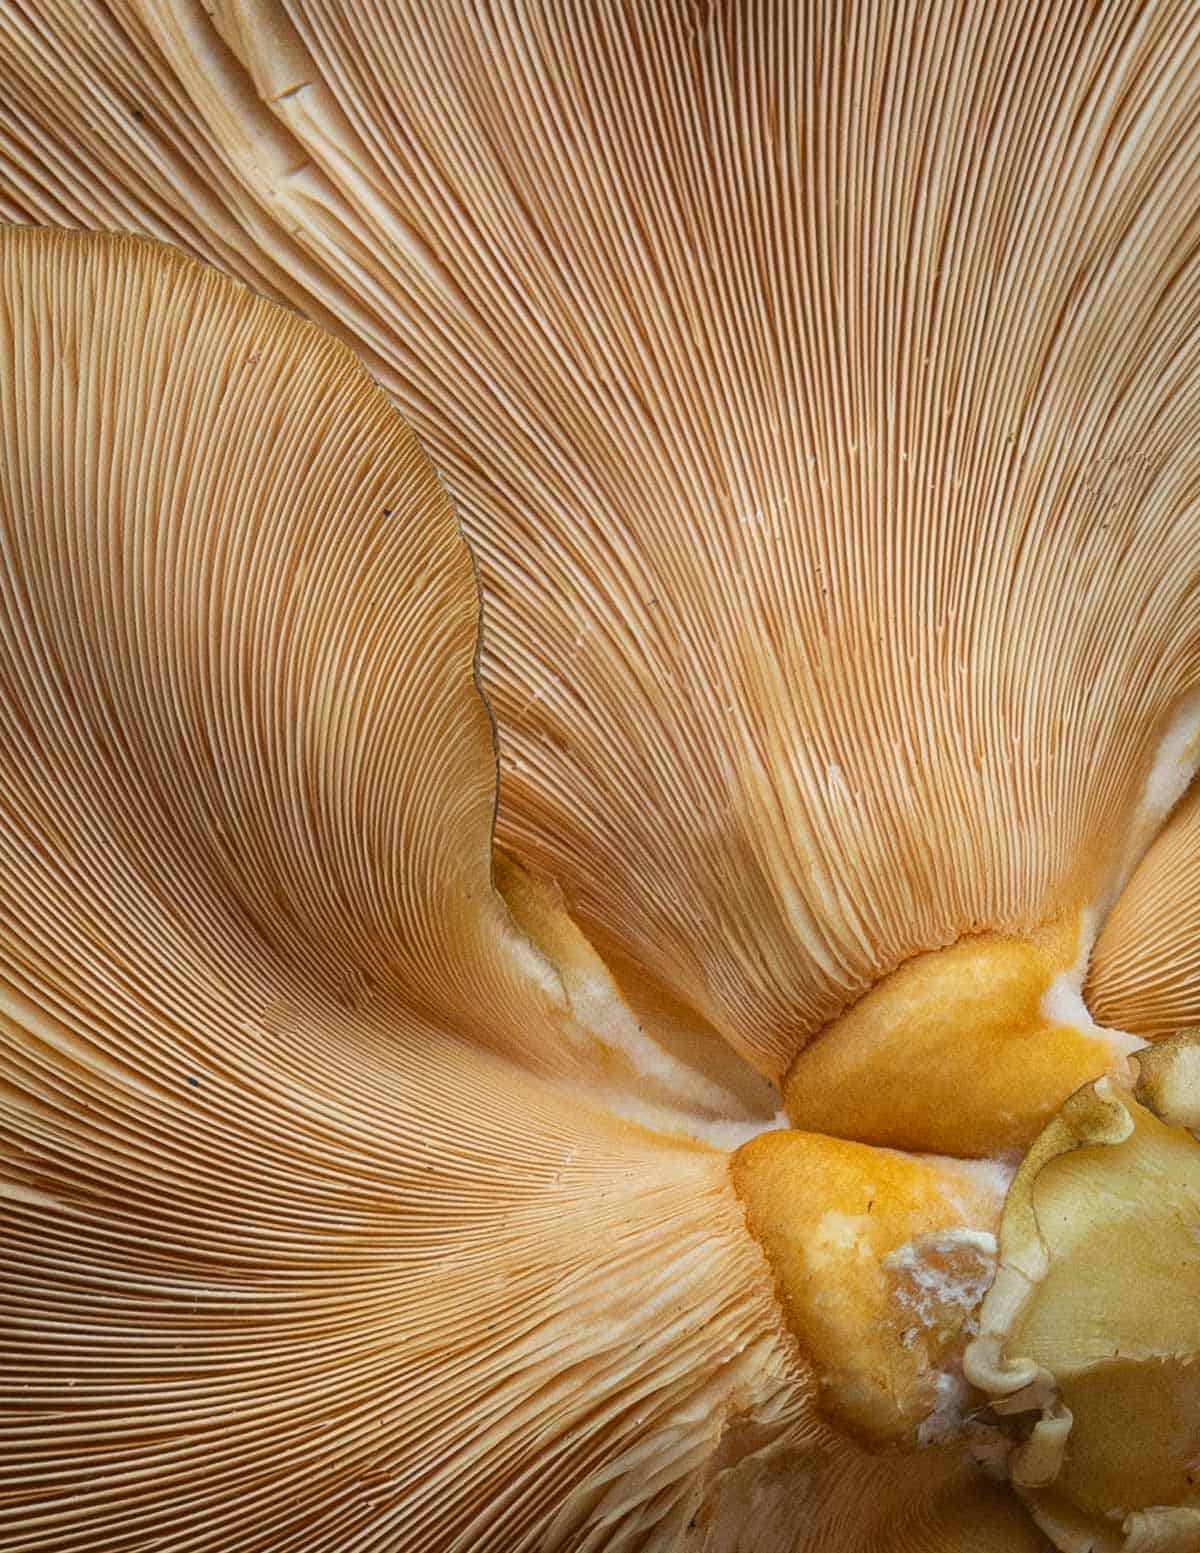 A close up image of mukitake or late fall oyster mushrooms showing orange gills. 